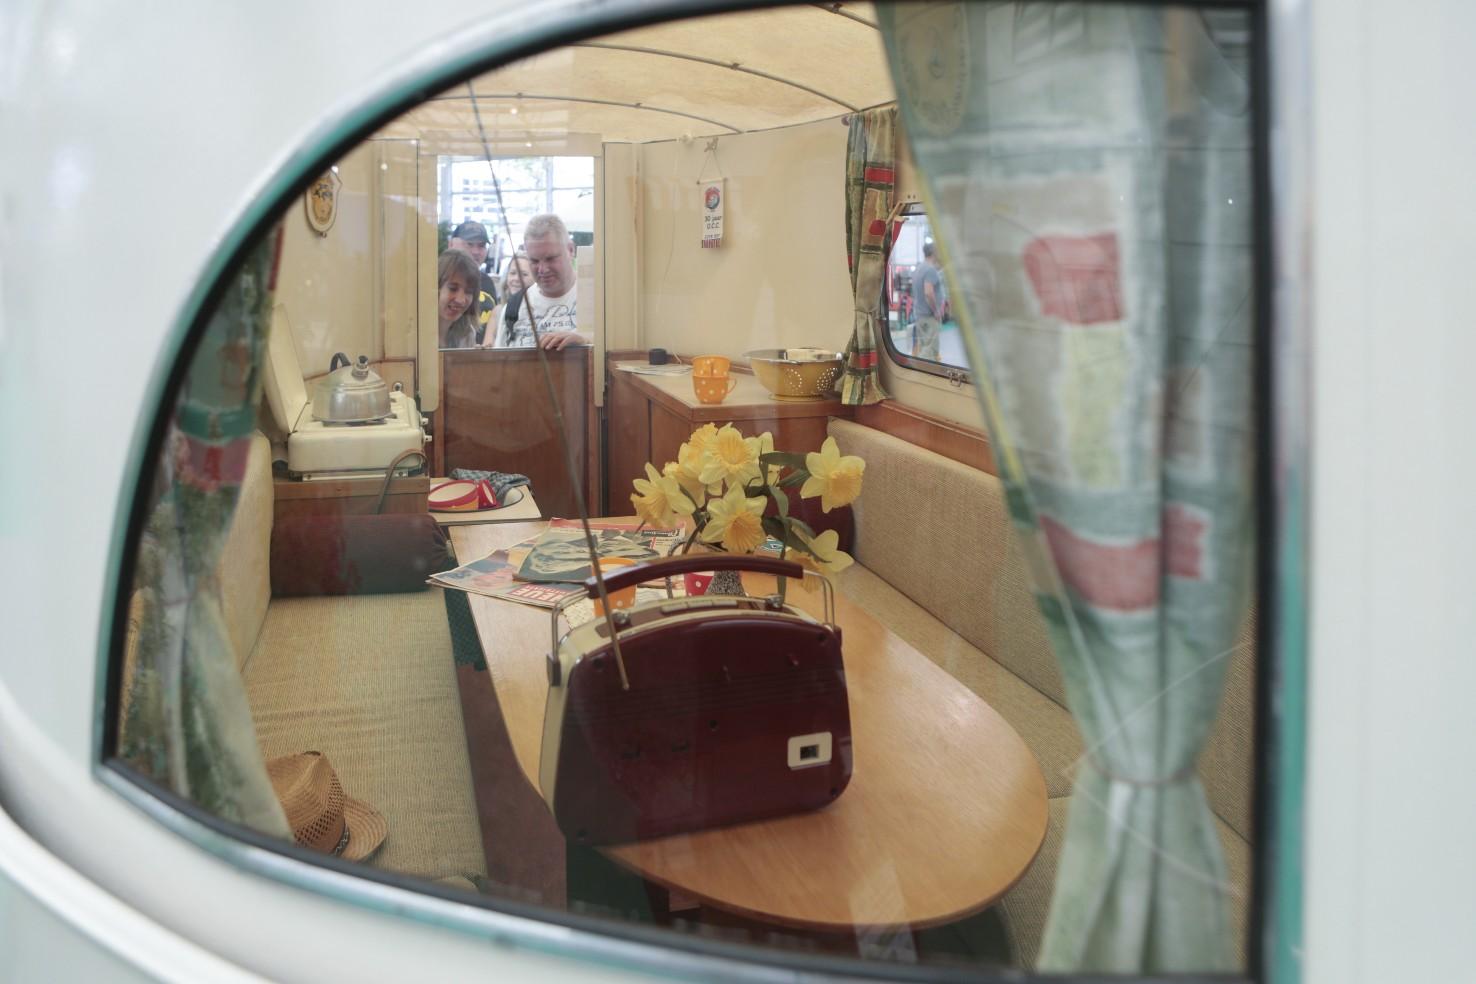 Not only new. Retro camping, from the Caravan Salon 2018 archive – image 3